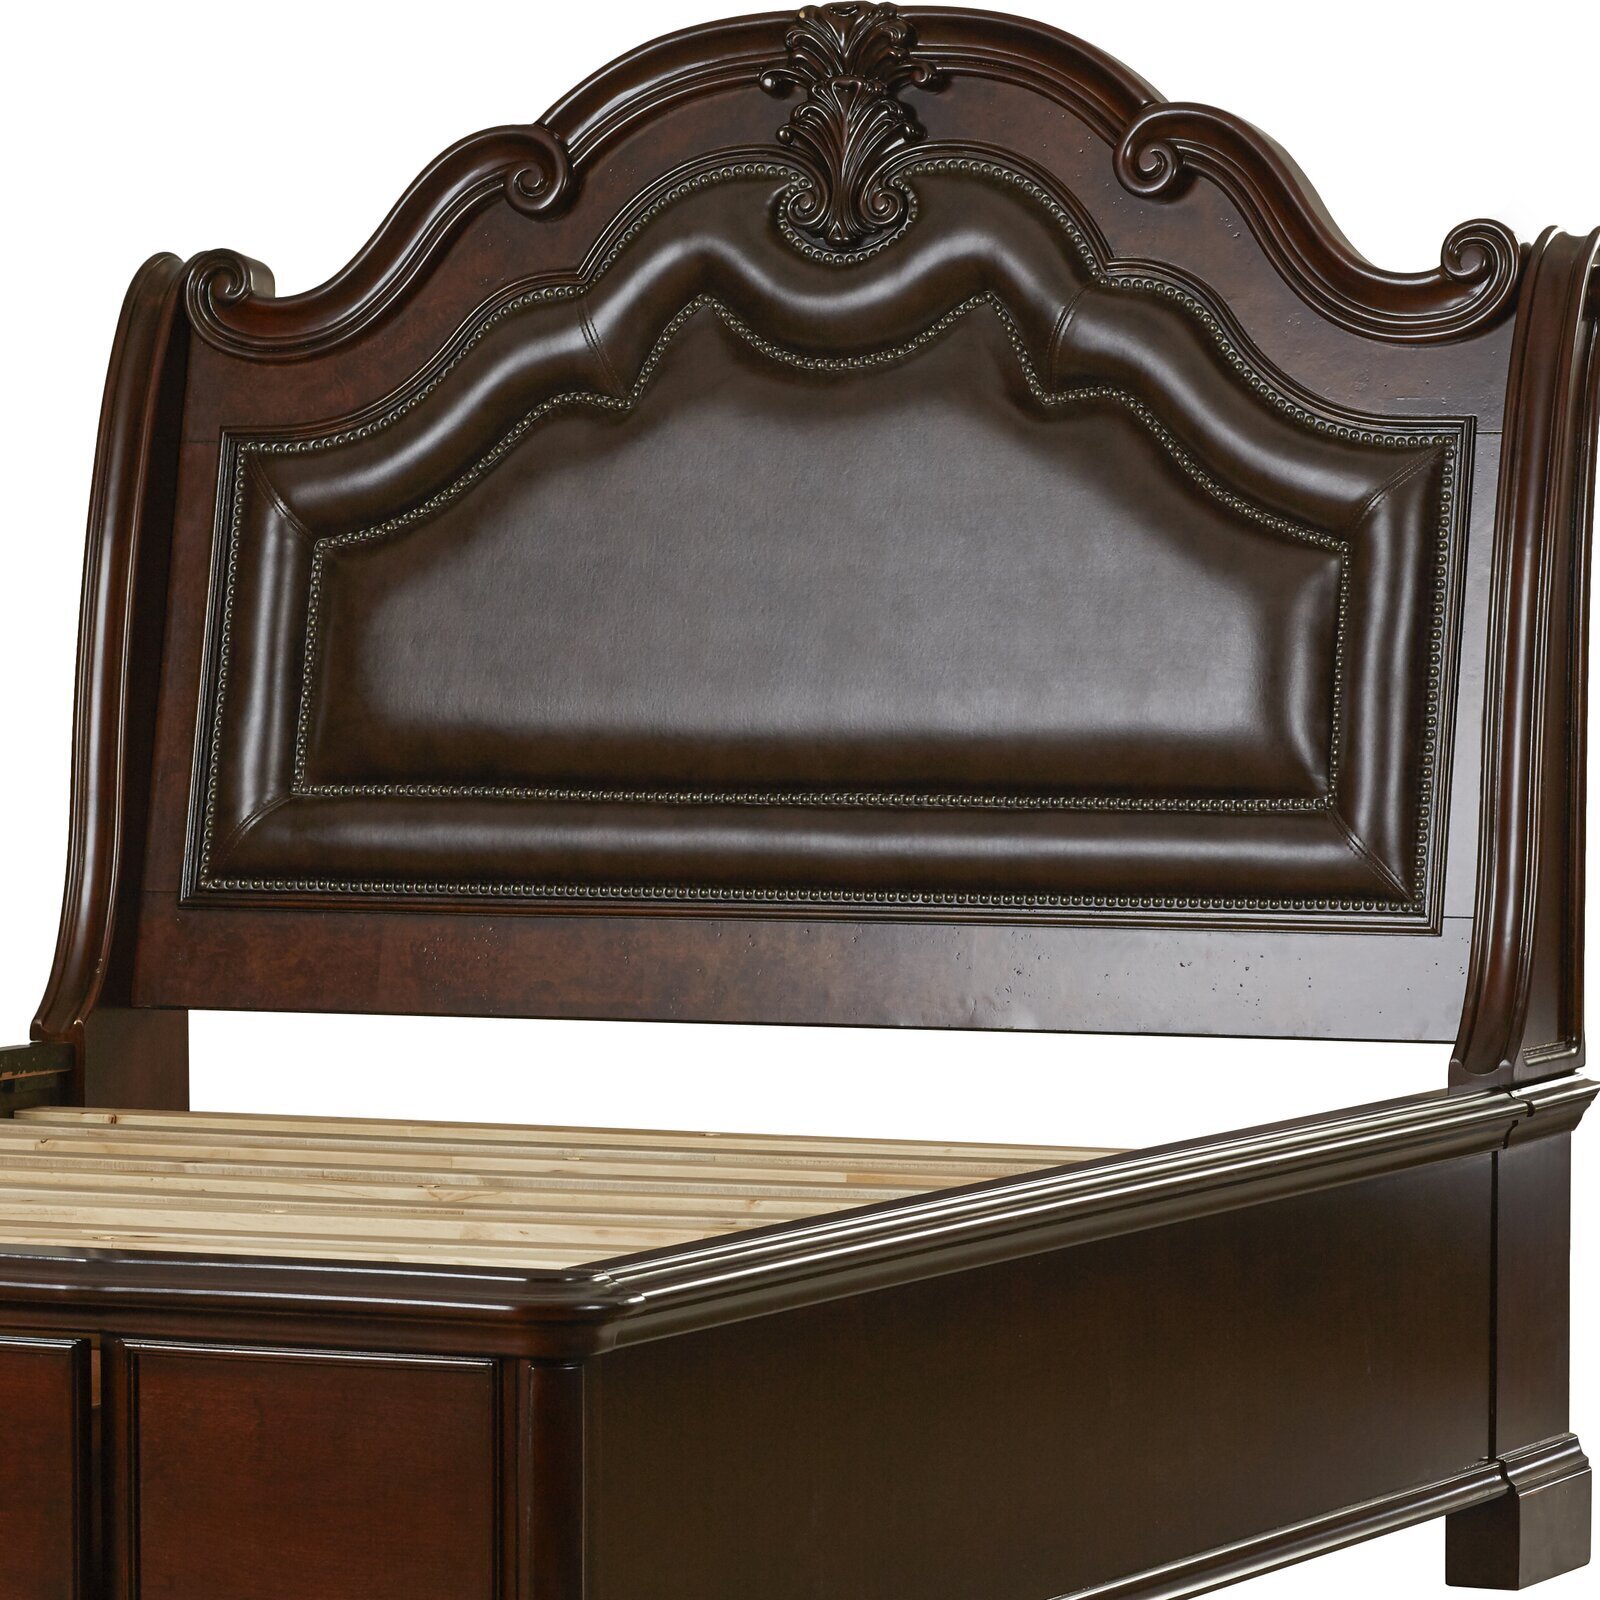 Grand and Stunning Wood and Leather Bed Headboard